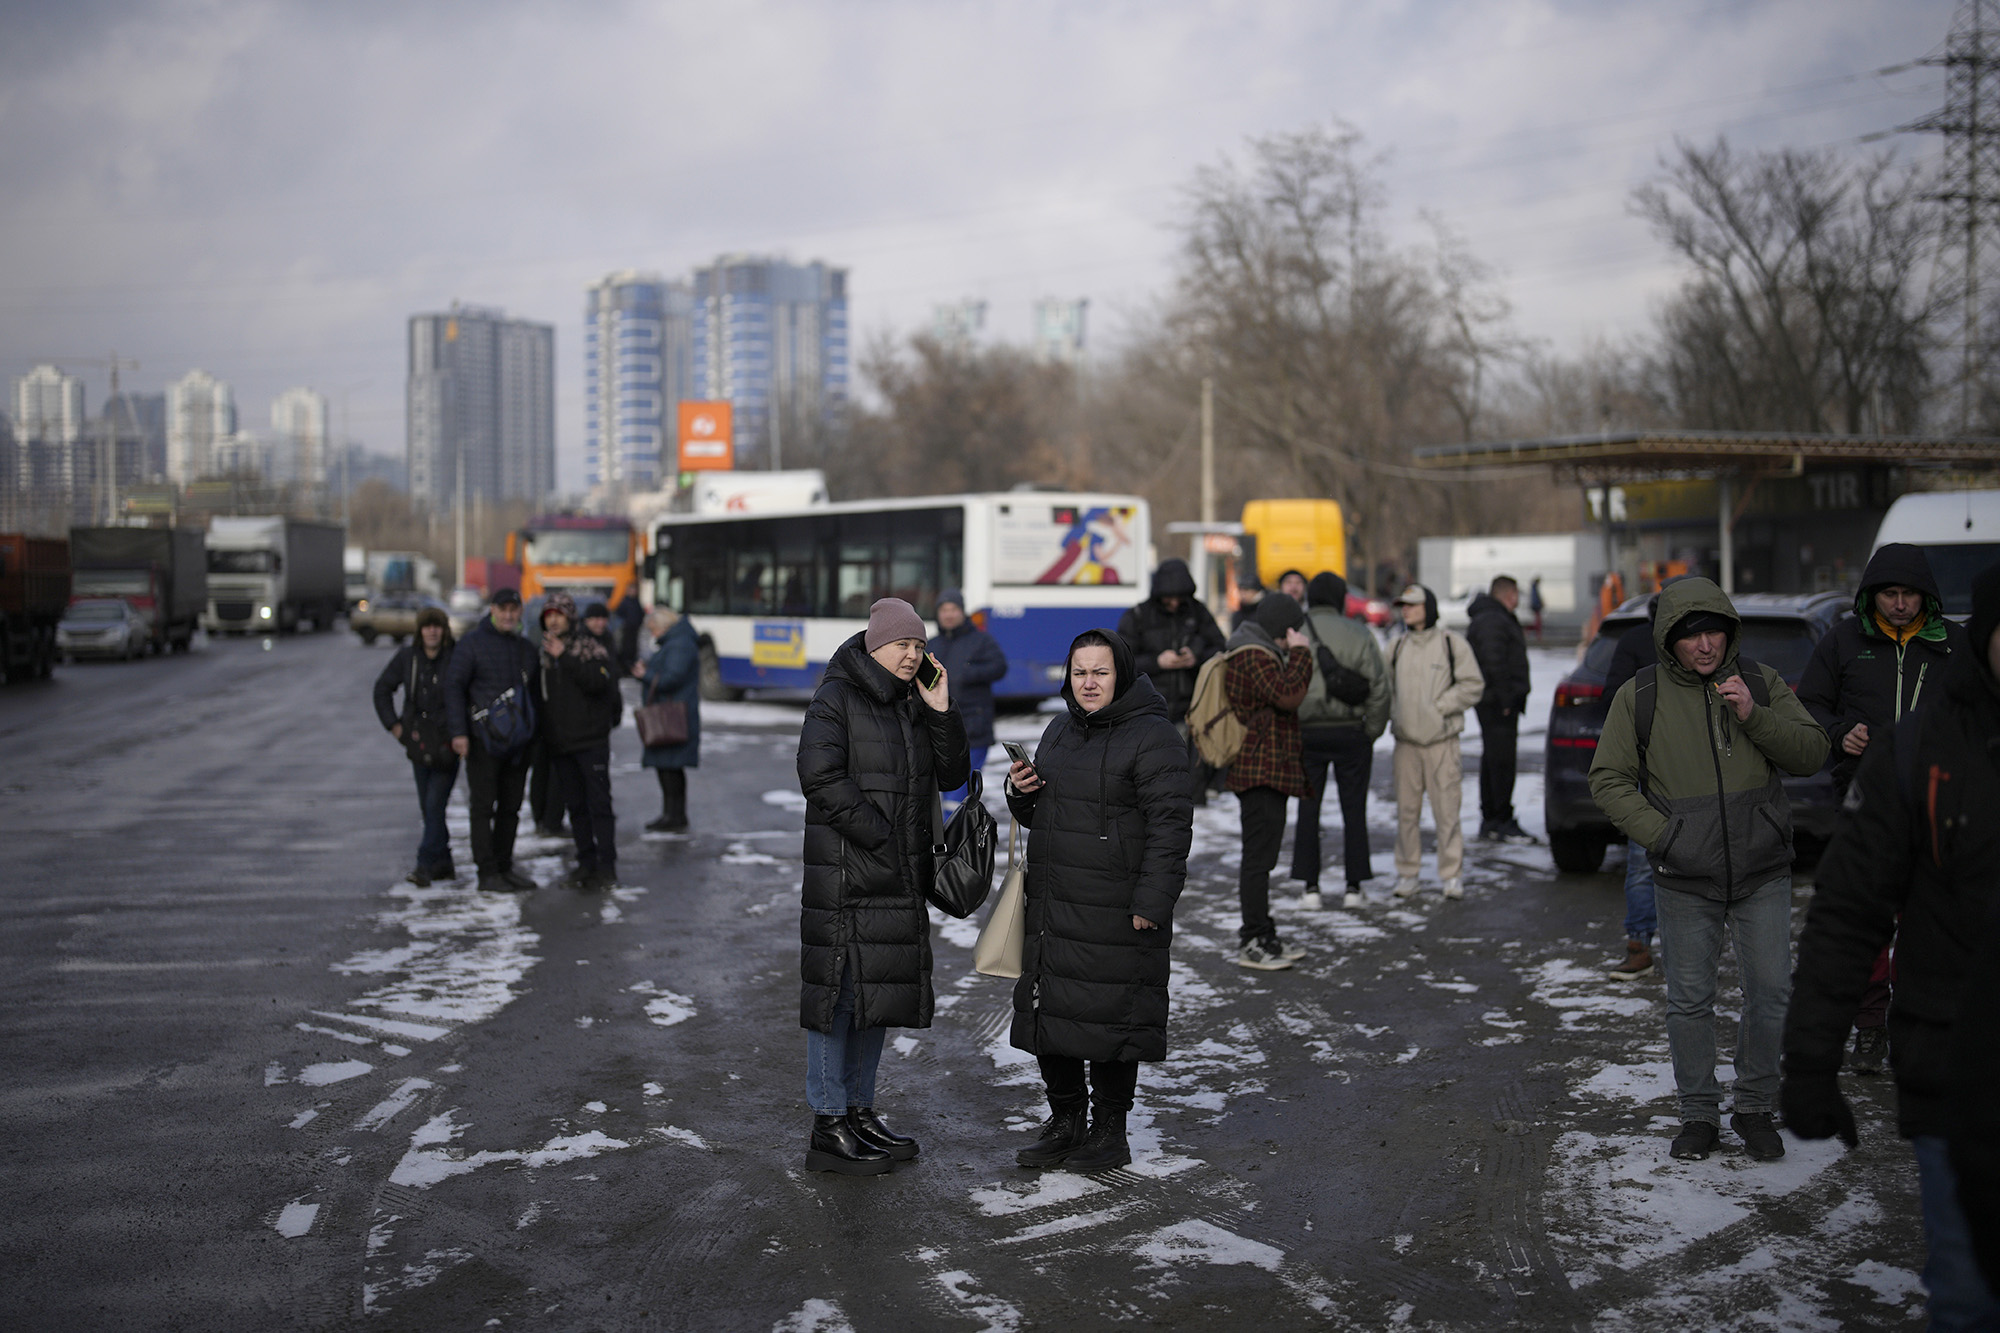 People wait on a street blocked by police after a rocket attack in Kyiv, Ukraine, on January 26.